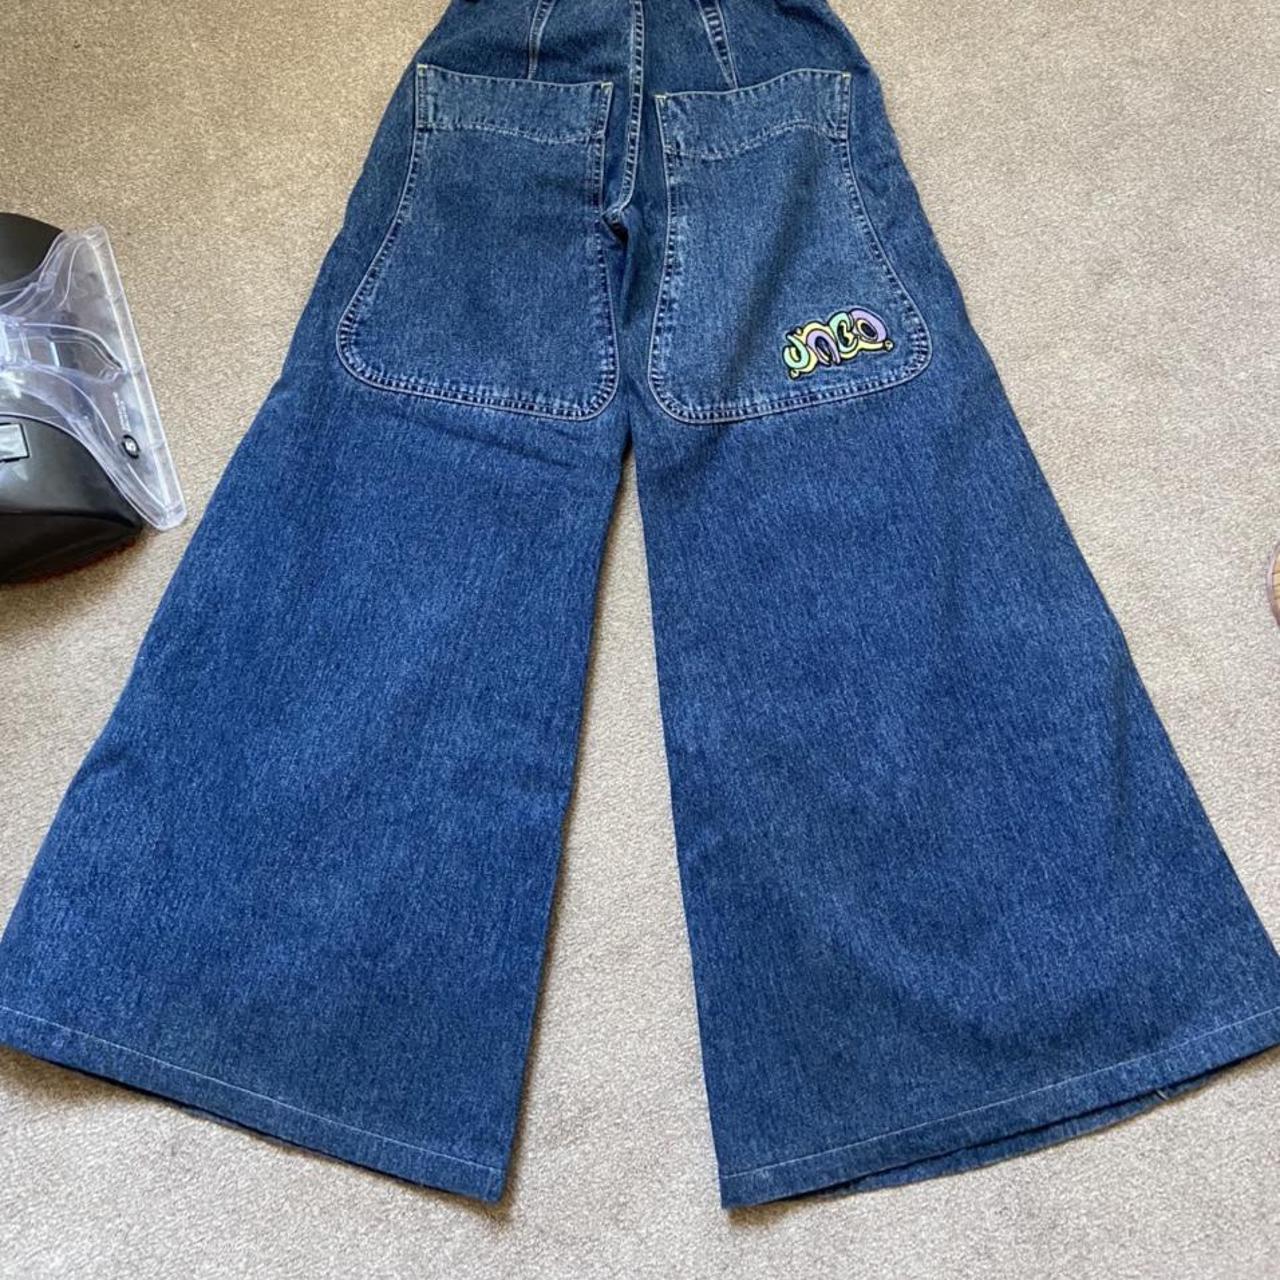 Vintage JNCO jeans - worn once. Great for those who... - Depop